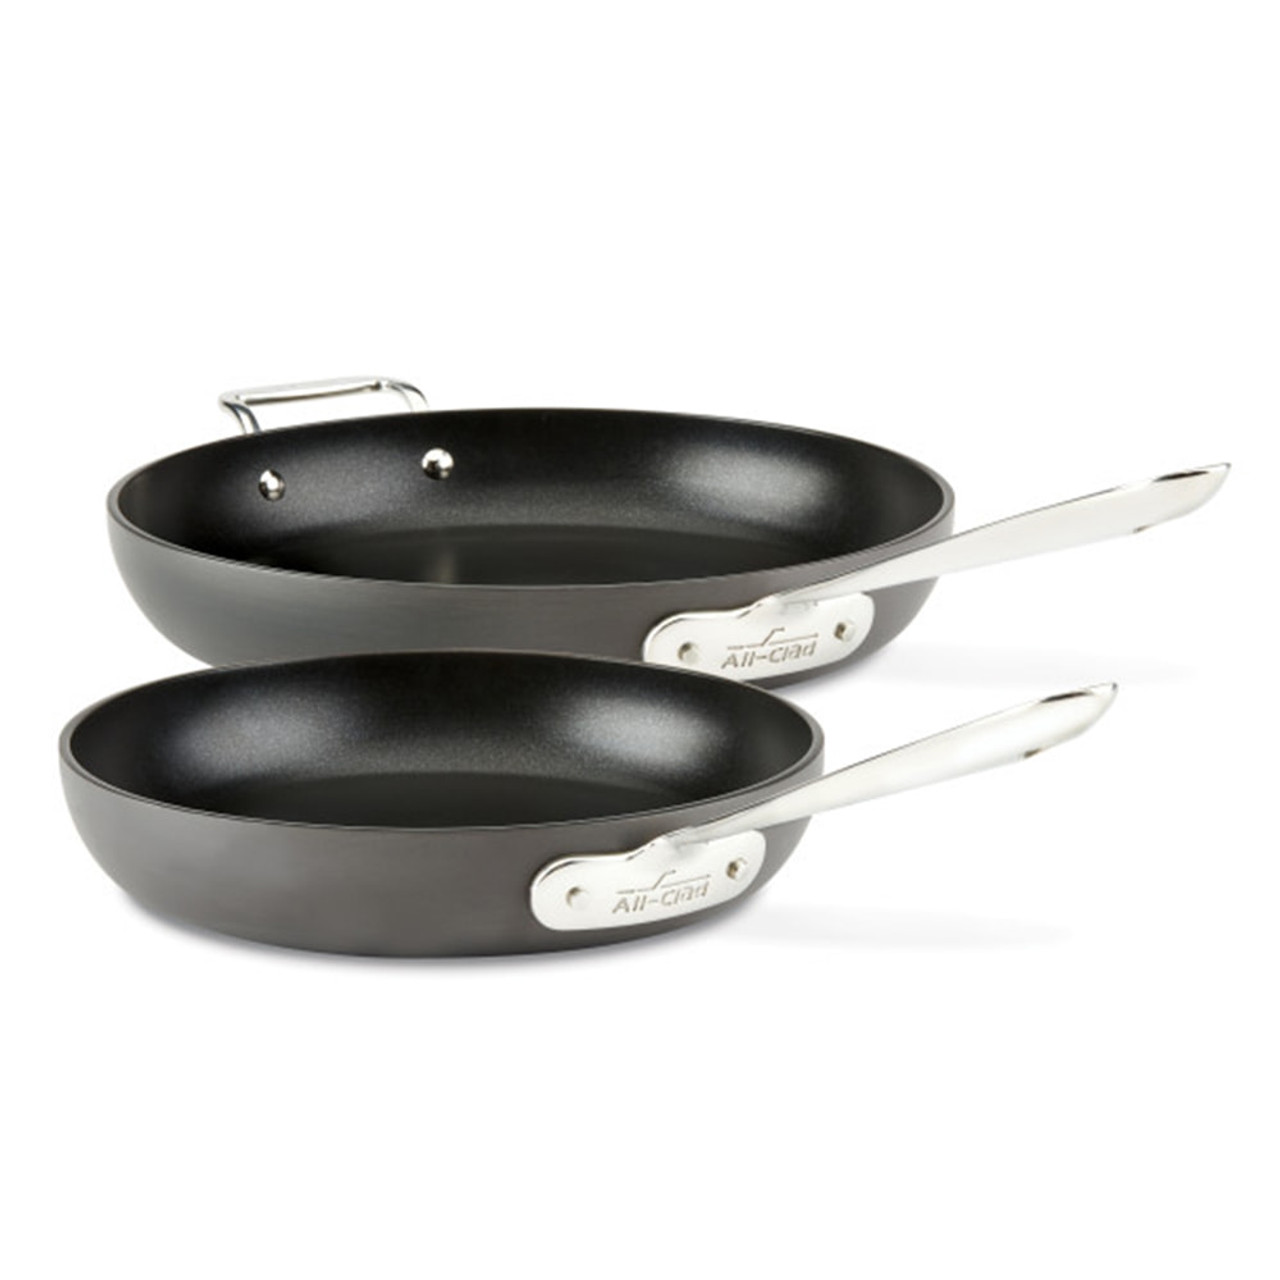 https://cdn11.bigcommerce.com/s-hccytny0od/images/stencil/1280x1280/products/519/8411/all-clad-ha1-10-12-inch-fry-pan-set__23756.1576080481.jpg?c=2?imbypass=on